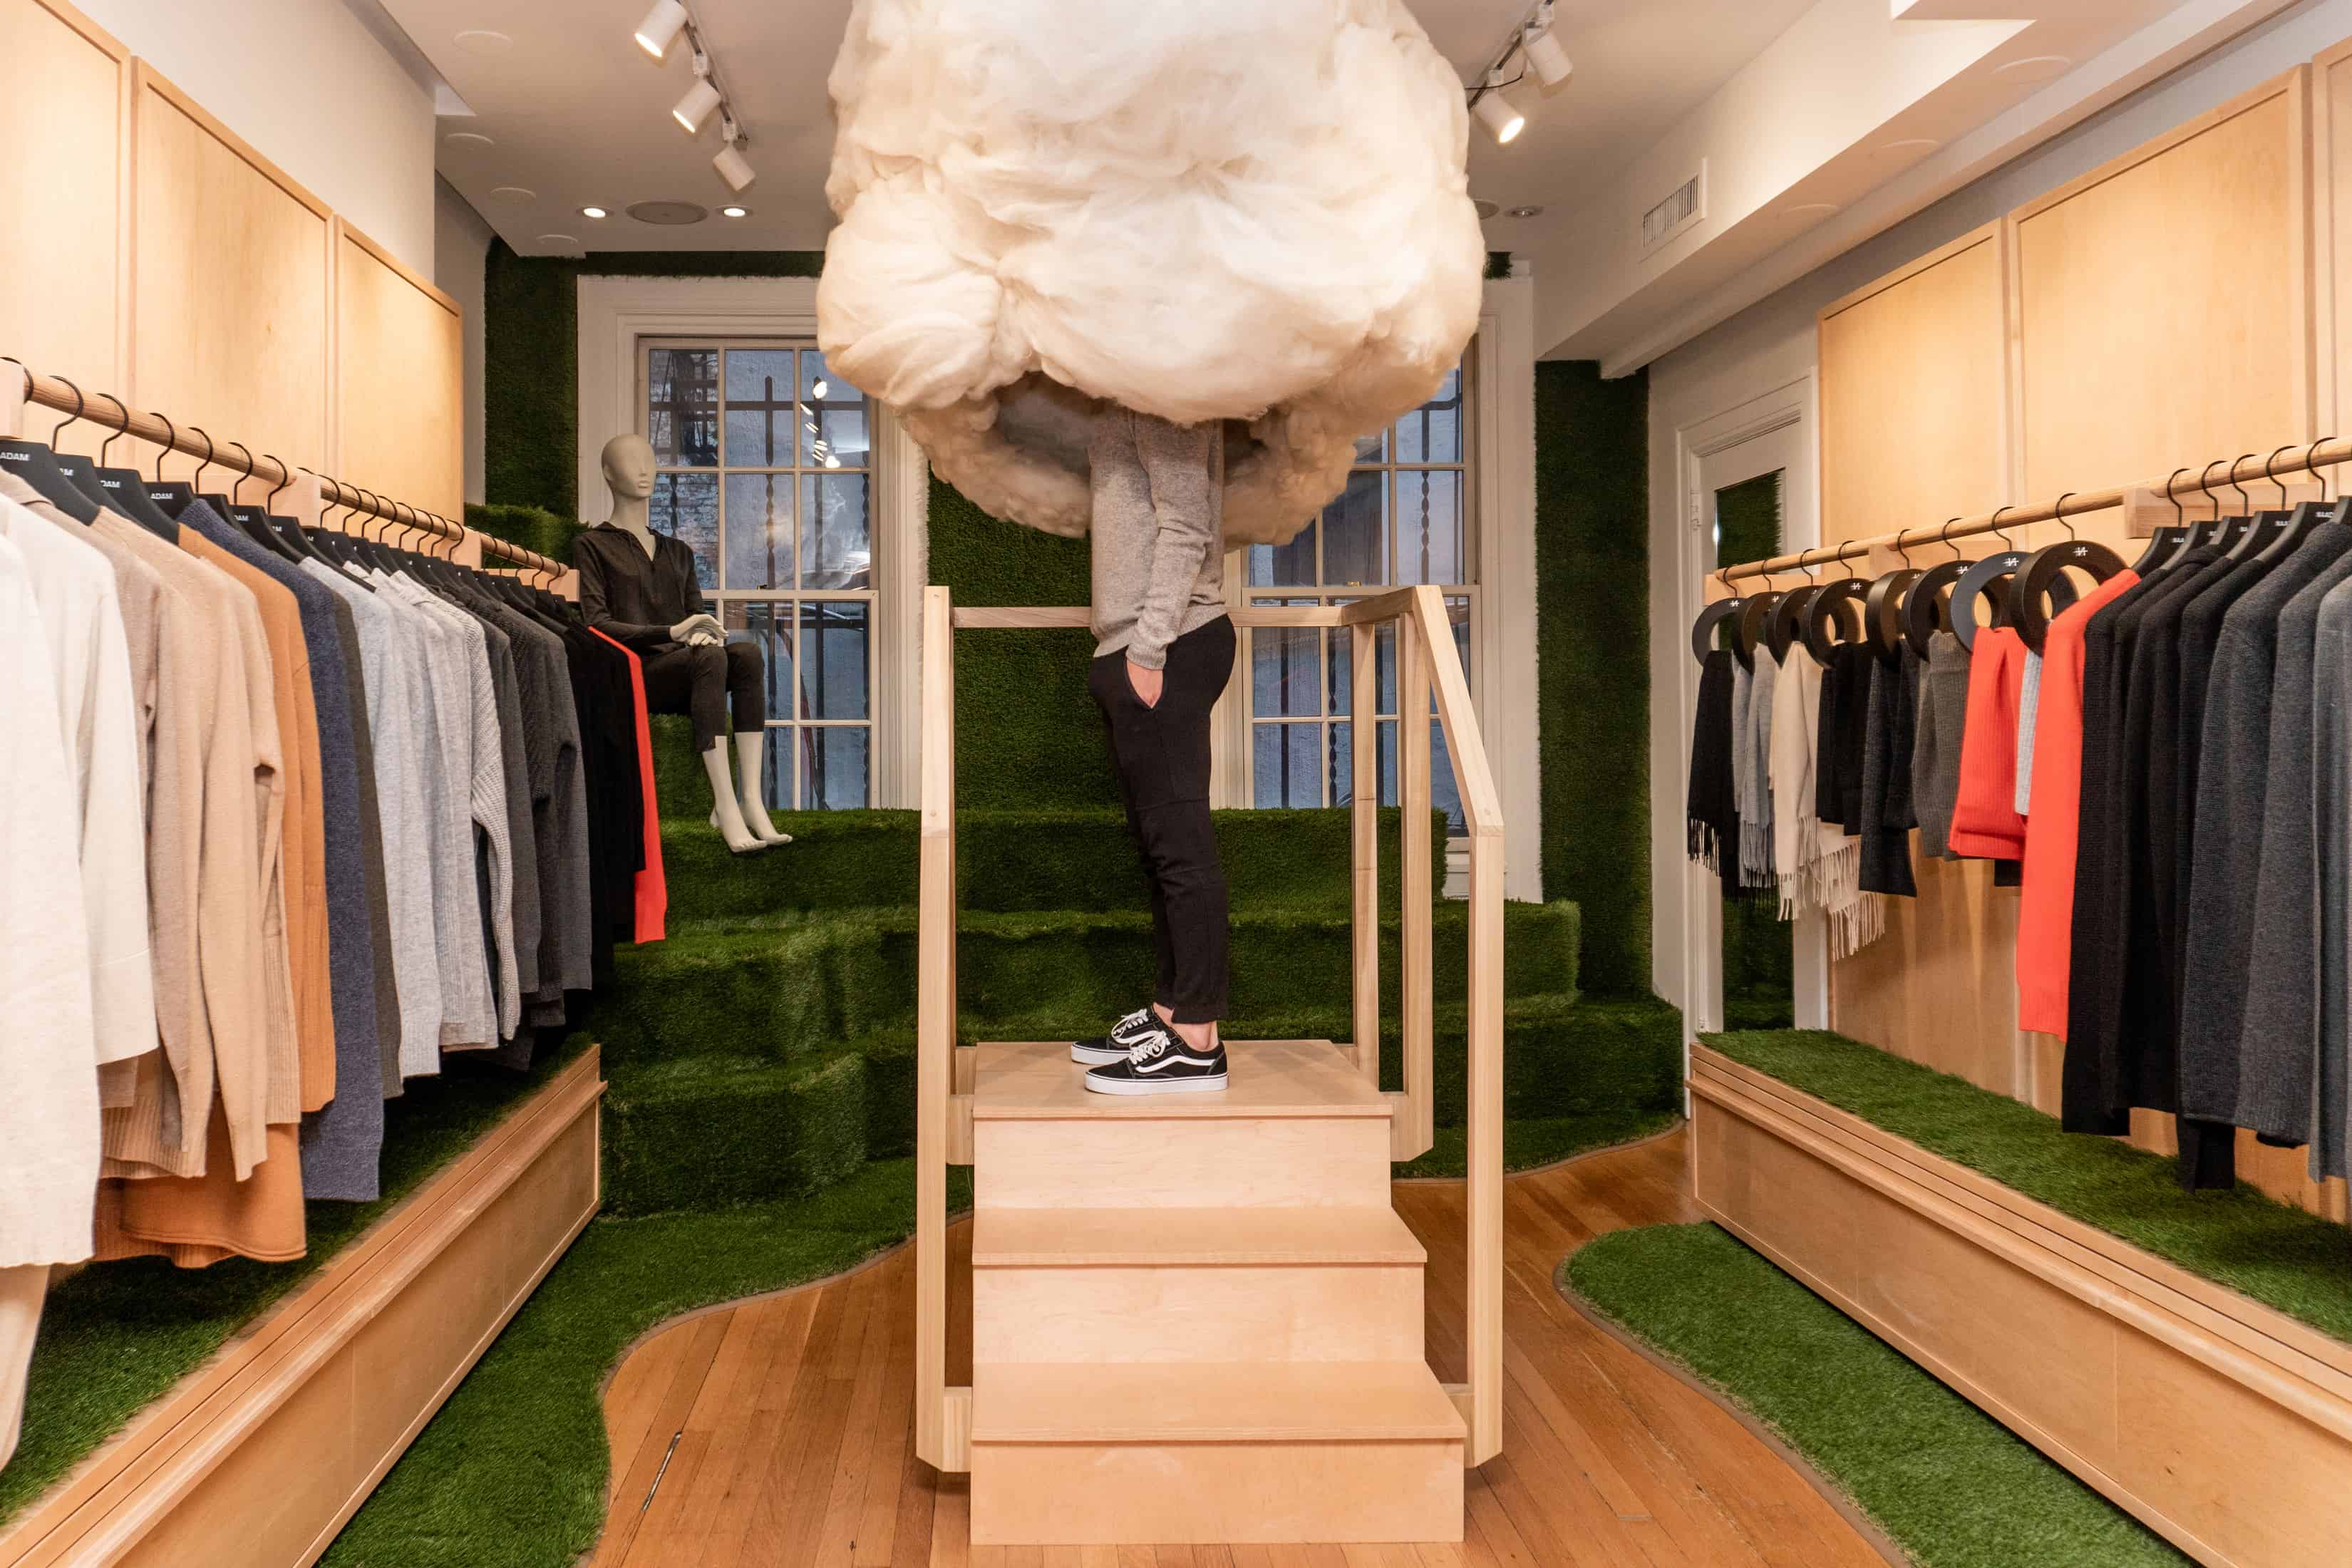 Affordable Cashmere Brand Naadam Aims to Bring Bleecker Street Back to Life